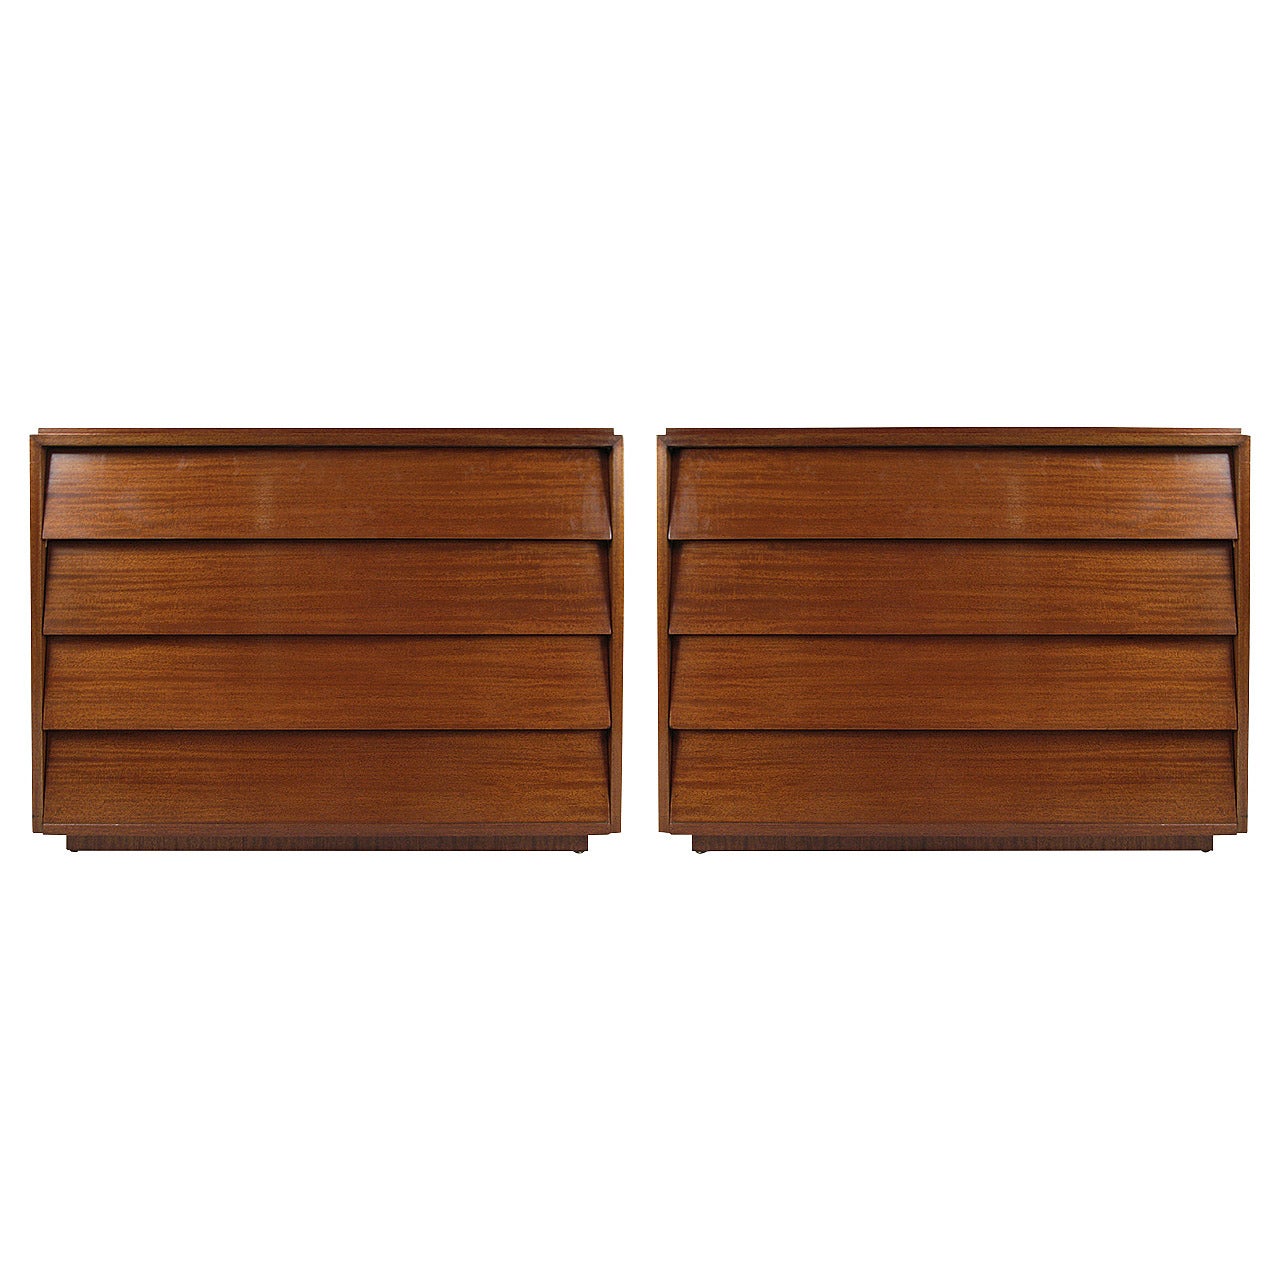 Pair of 1940s Mahogany Four-Drawer Chests